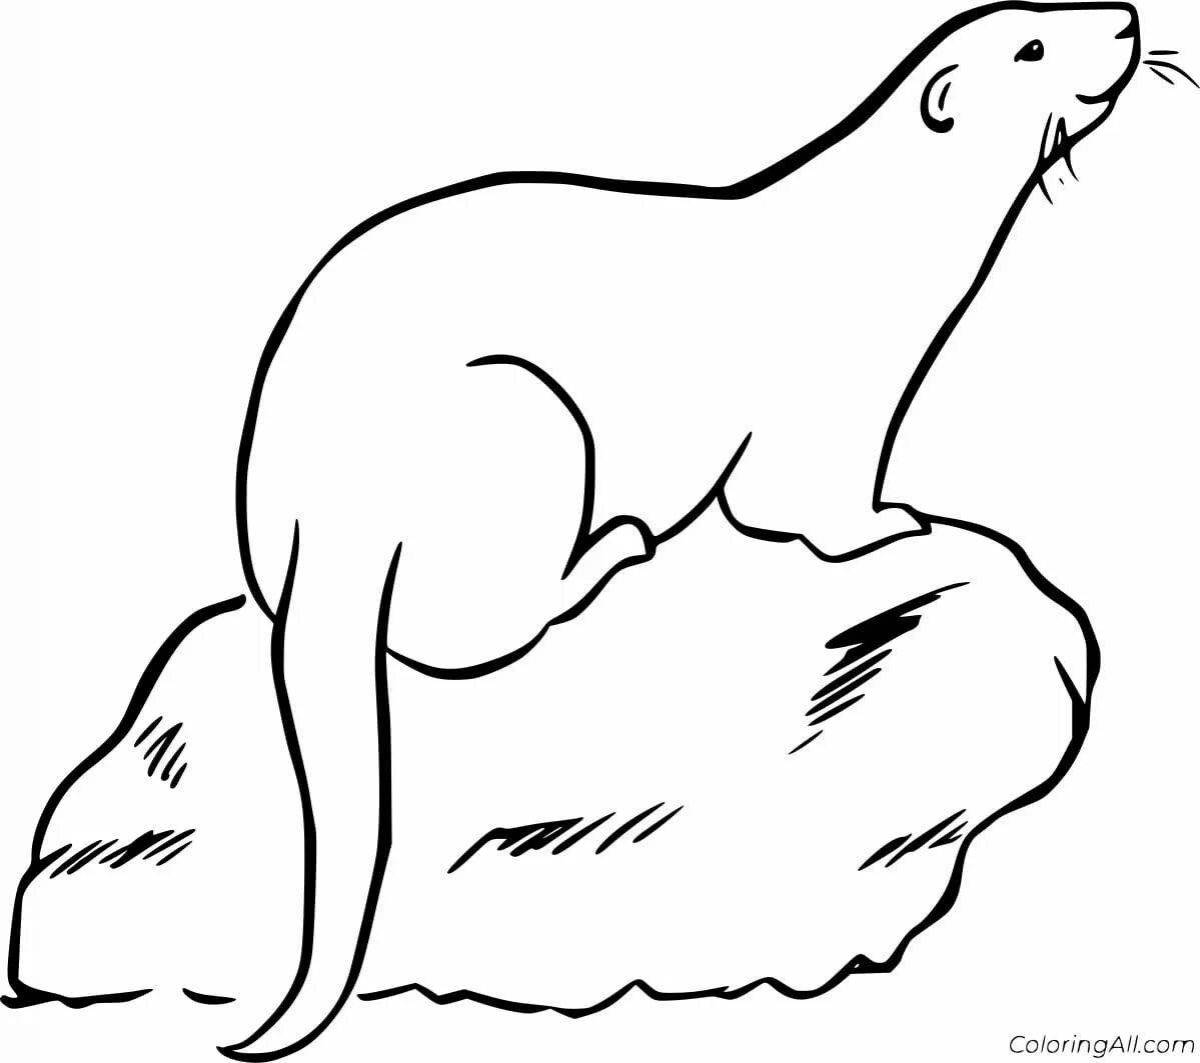 Coloring page frolicking river otter